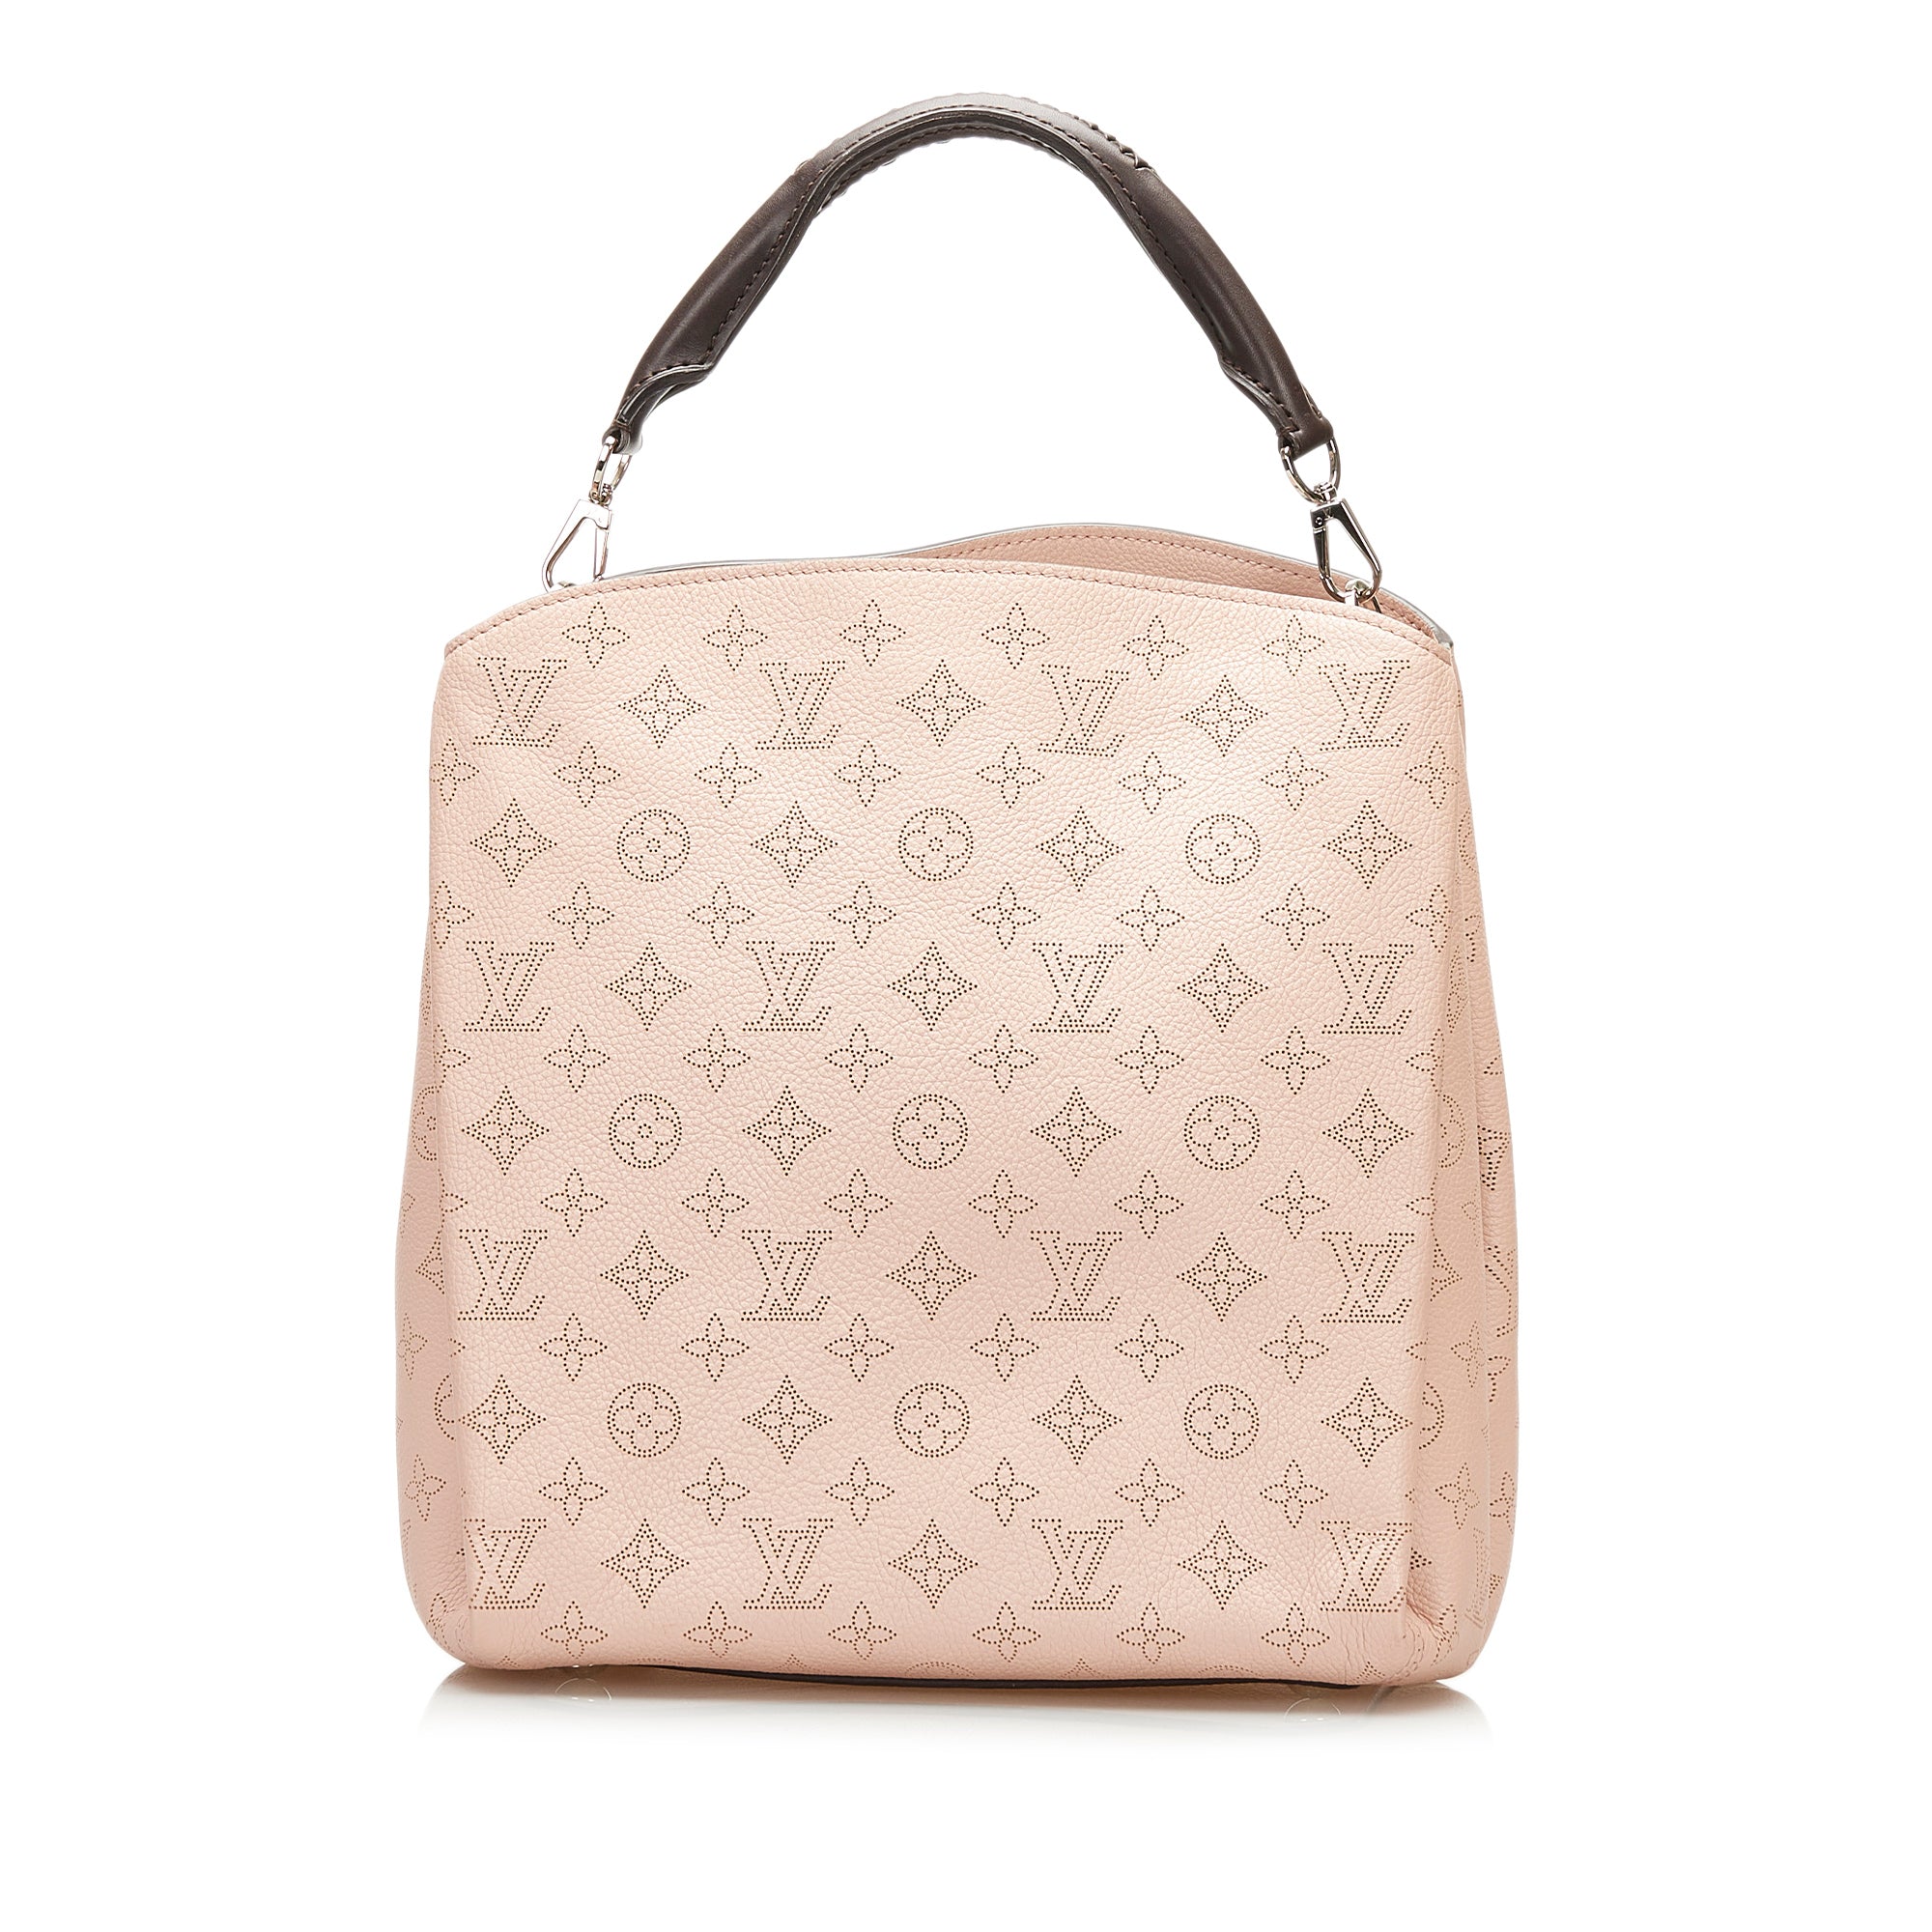  Louis Vuitton, Pre-Loved Pink Monogram Mahina Leather